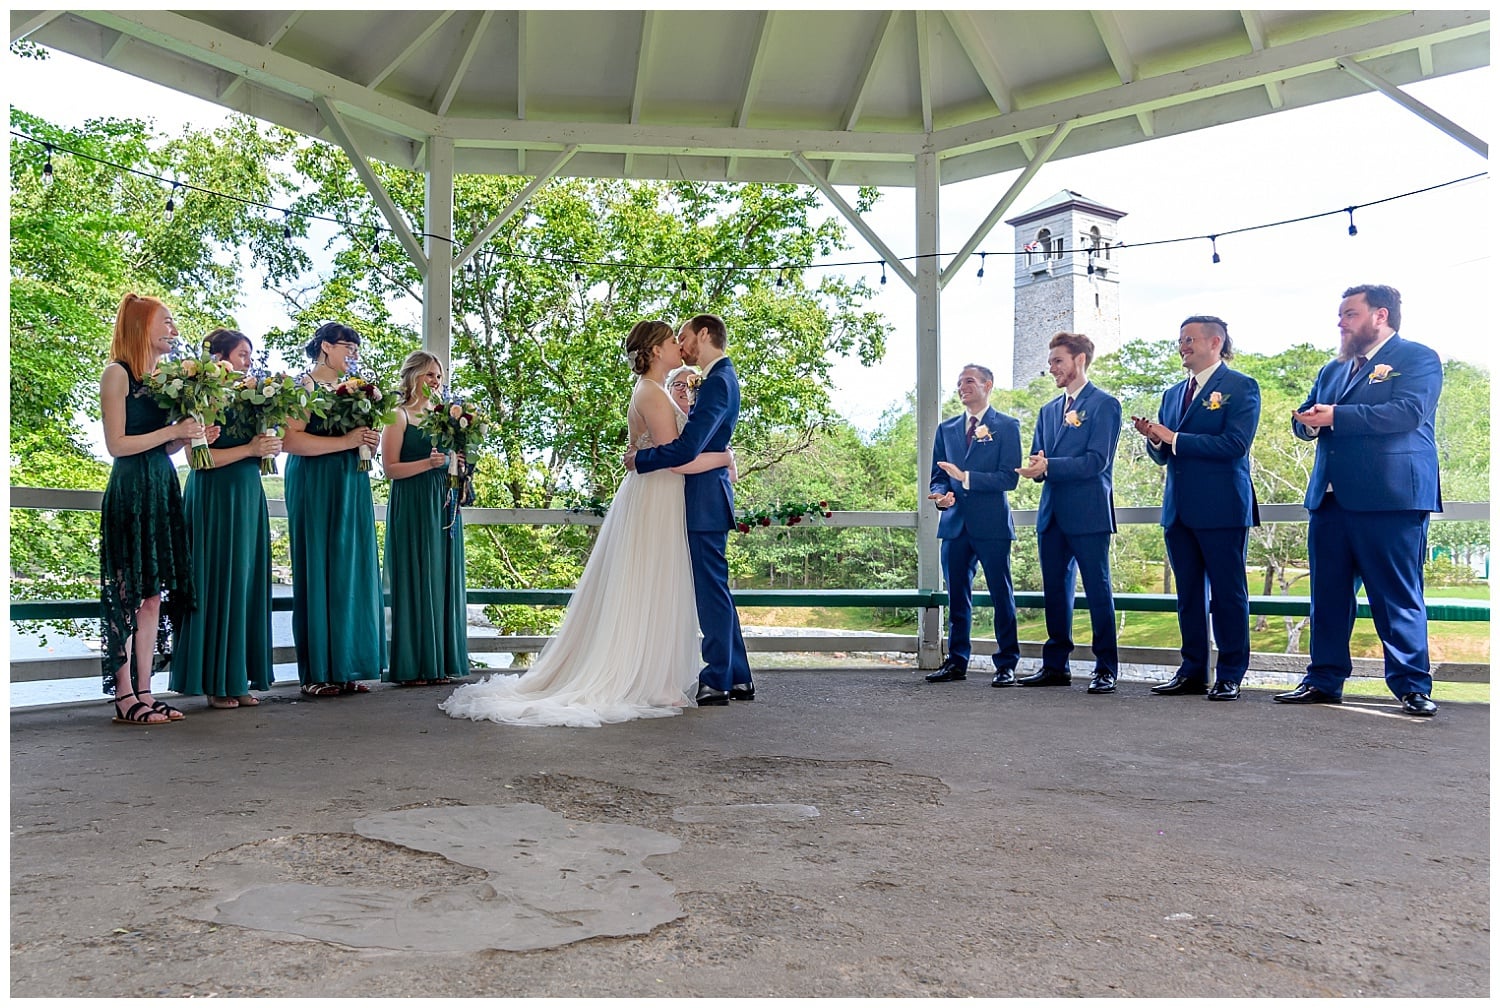 the bride and groom have their first kiss during their wedding ceremony in the gazebo at Sir Sandford Fleming Park in Halifax, NS.